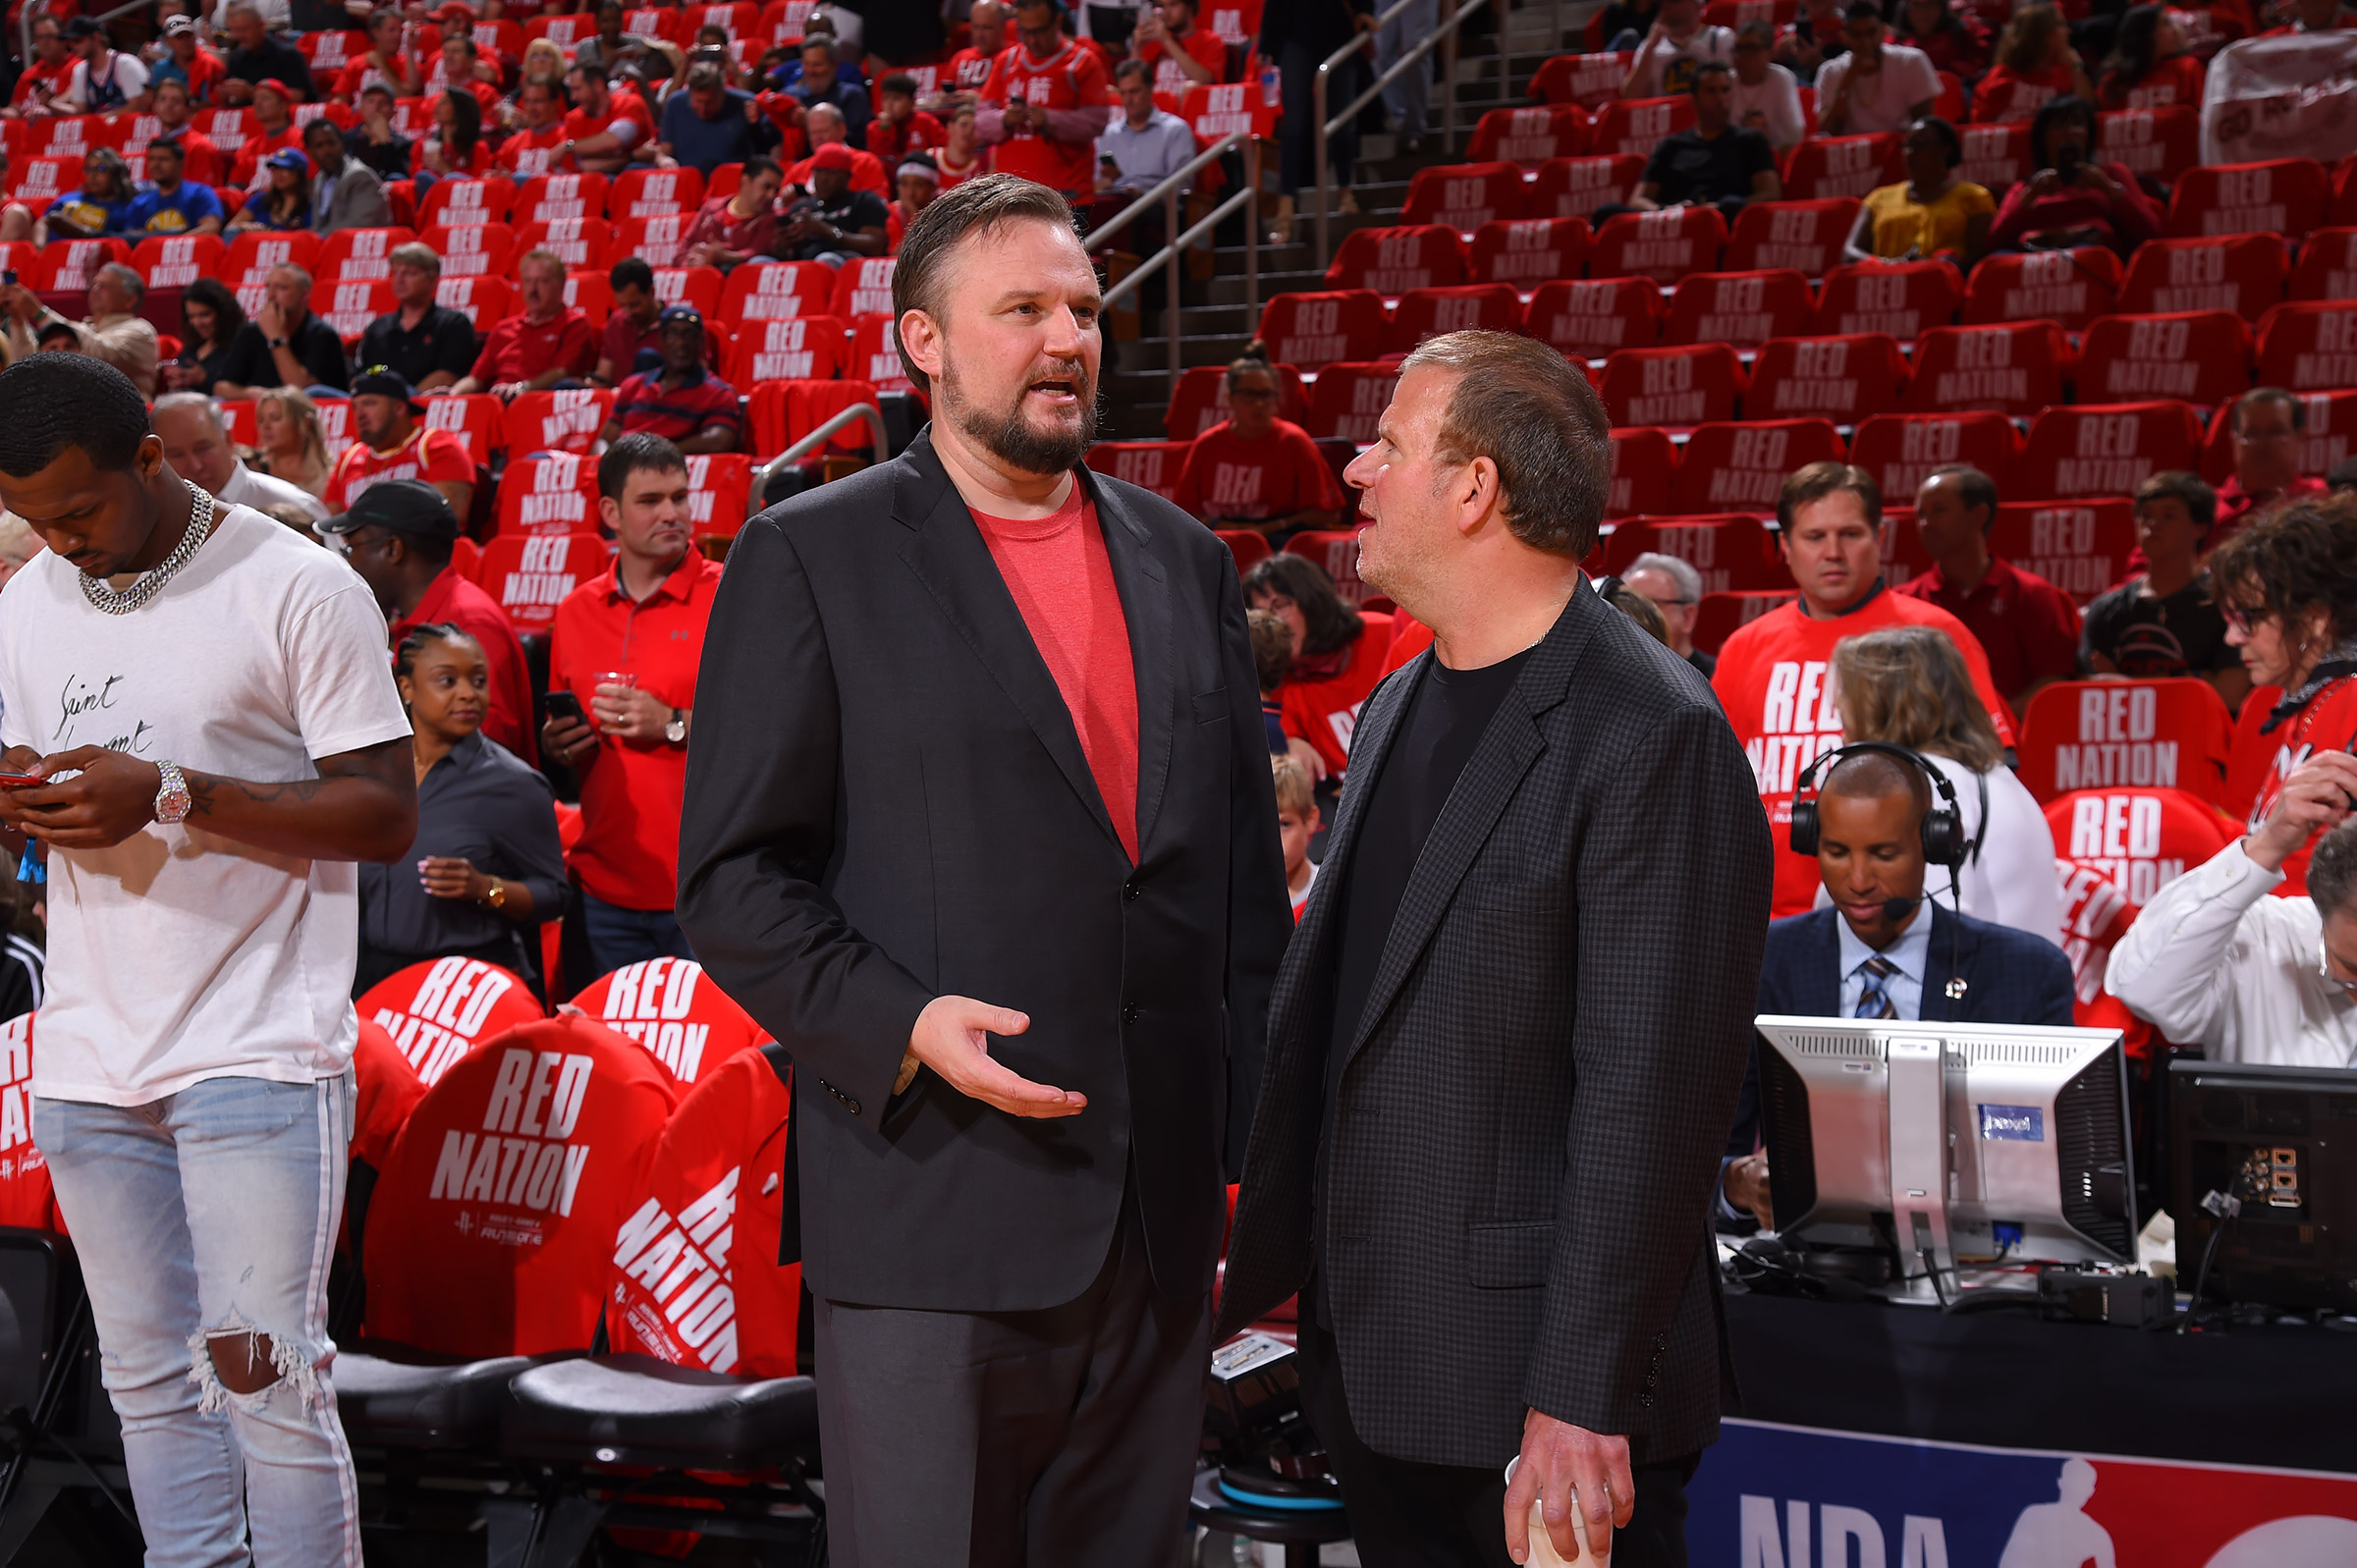 Houston Rockets General Manager Daryl Morey and Houston Rockets owner Tilman Fertitta speak during Game Four of the Western Conference Semifinals of the 2019 NBA Playoffs on May 6, 2019 in Houston. (Bill Baptist&mdash;NBAE/Getty Images)